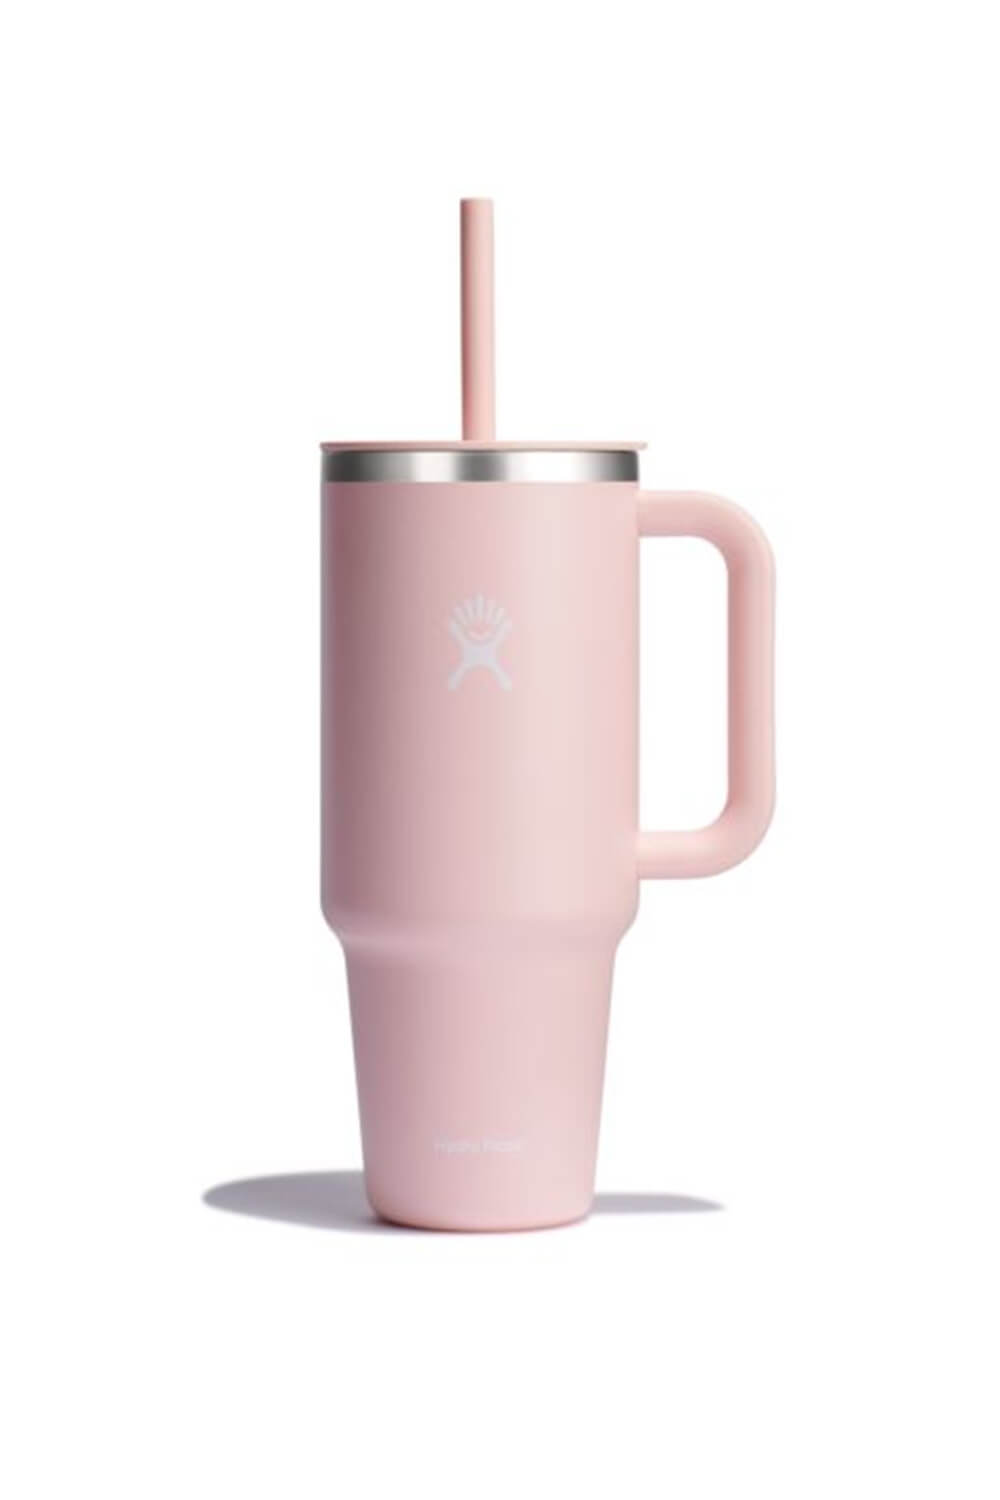 Simply Southern 40oz Tumbler in Pink Daisy